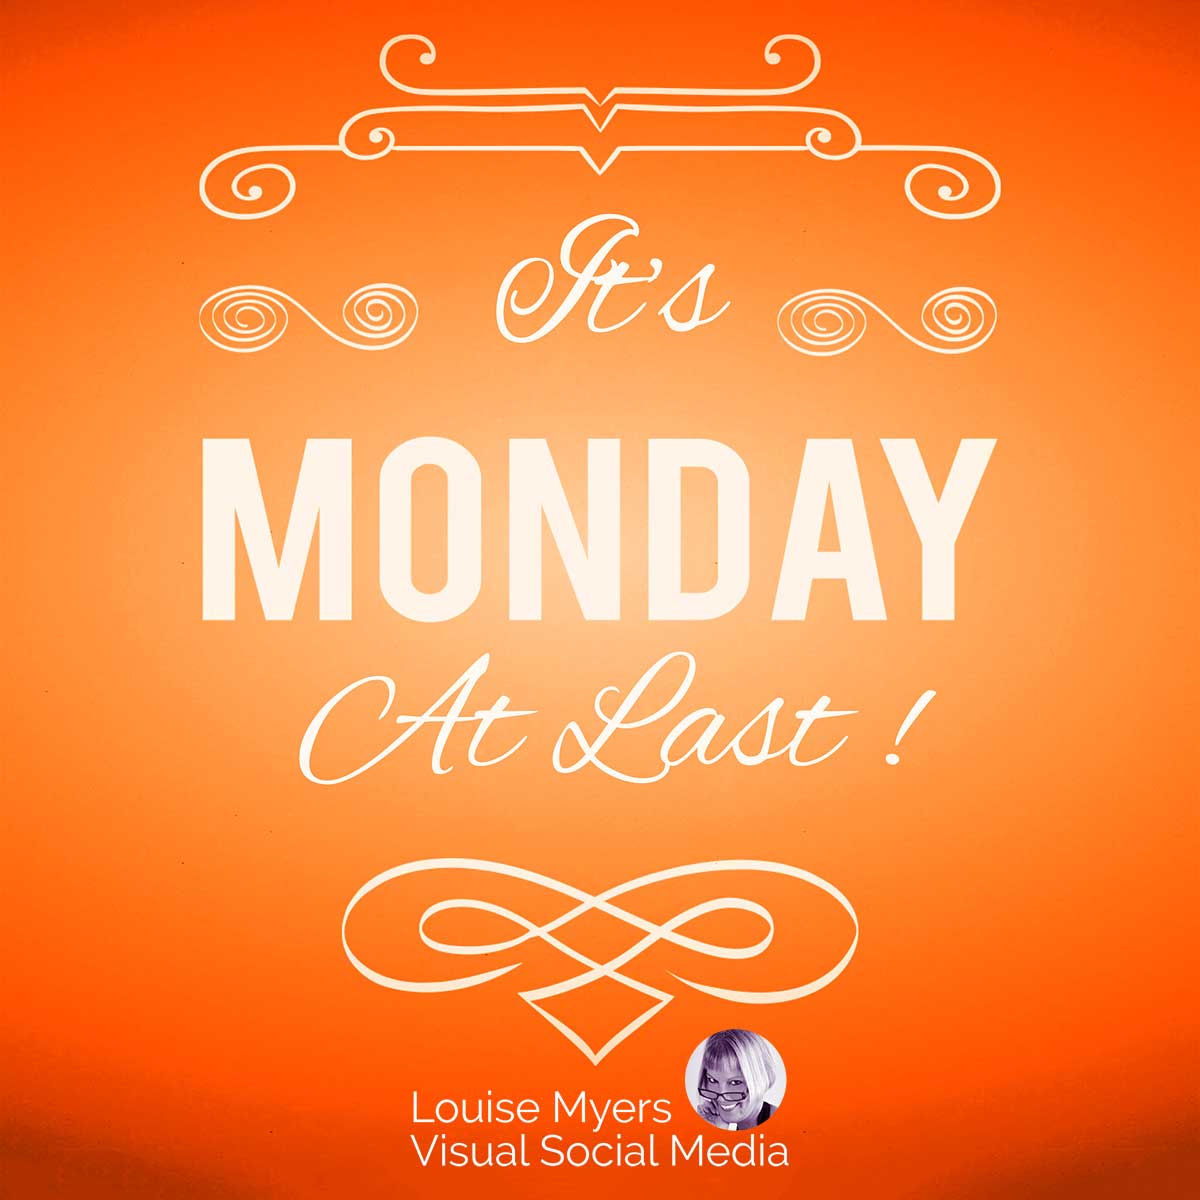 orange graphic with white swirls and text saying it's monday at last.